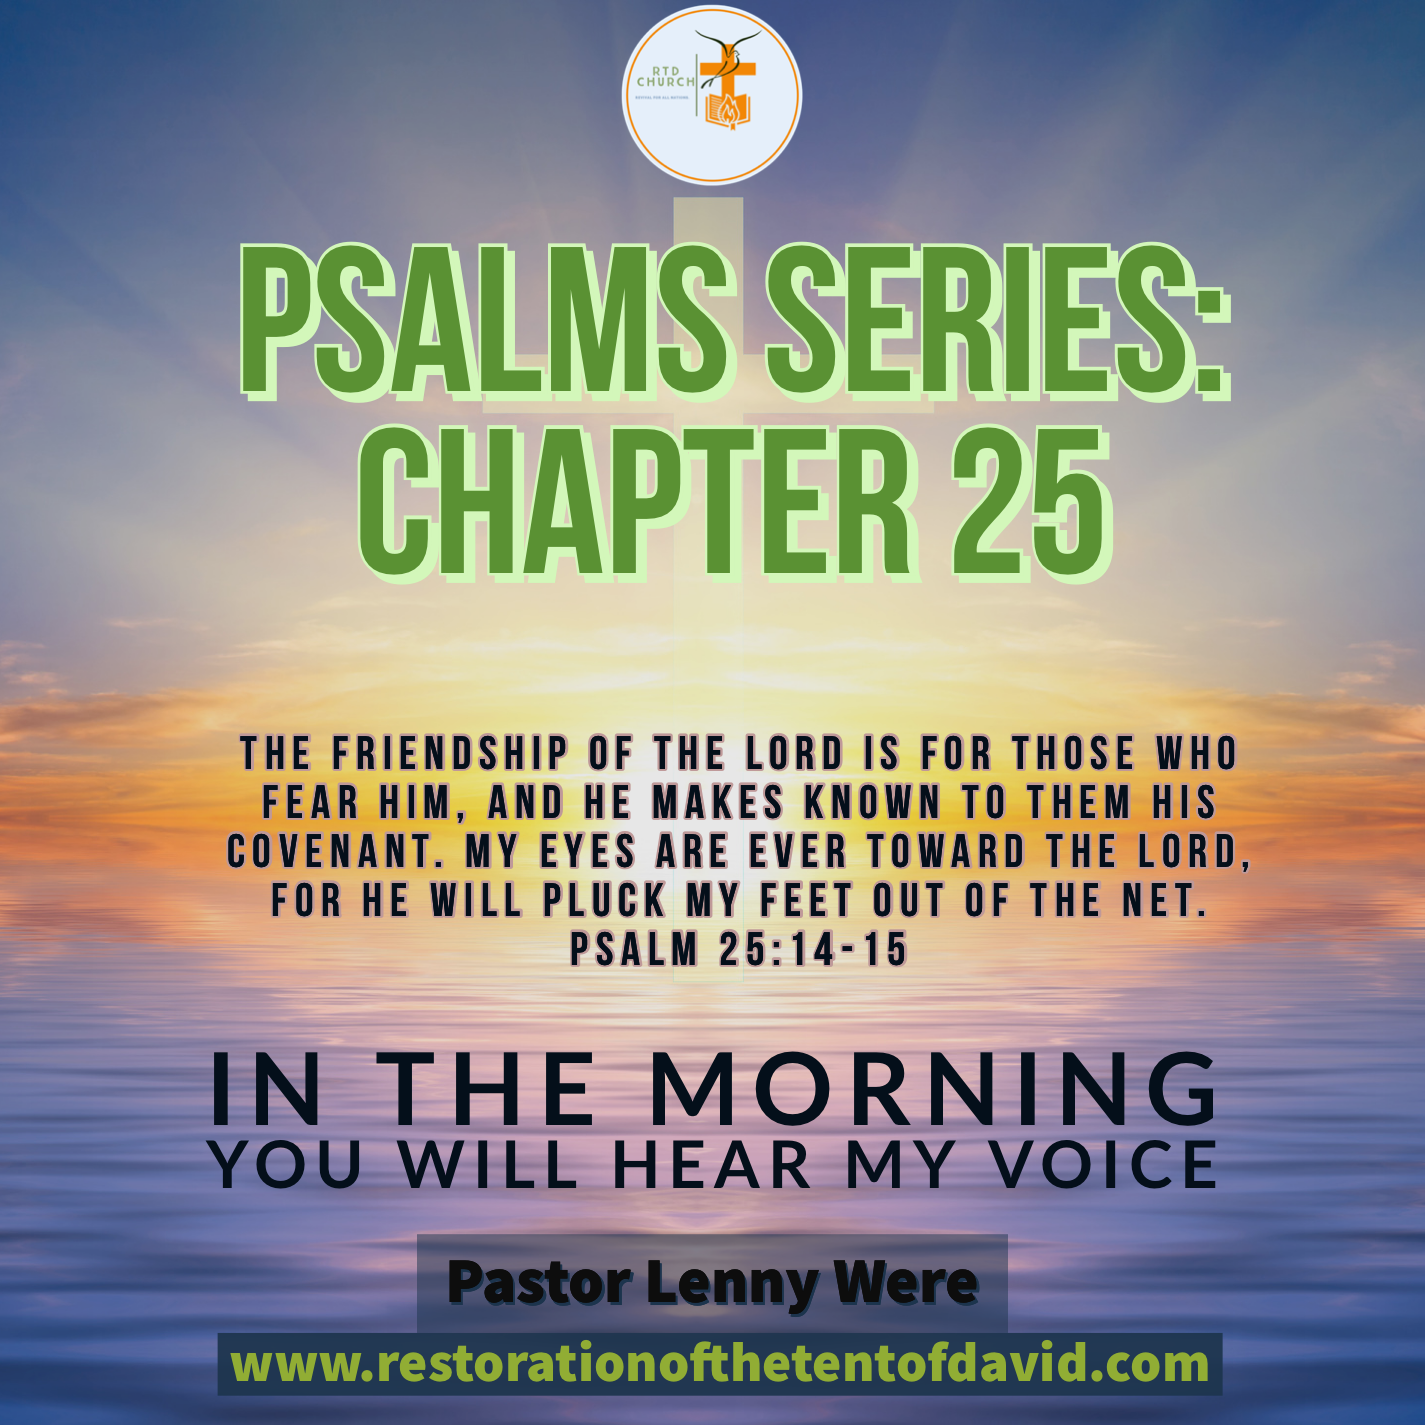 In the morning will you hear my Voice, Psalms Chapter 25